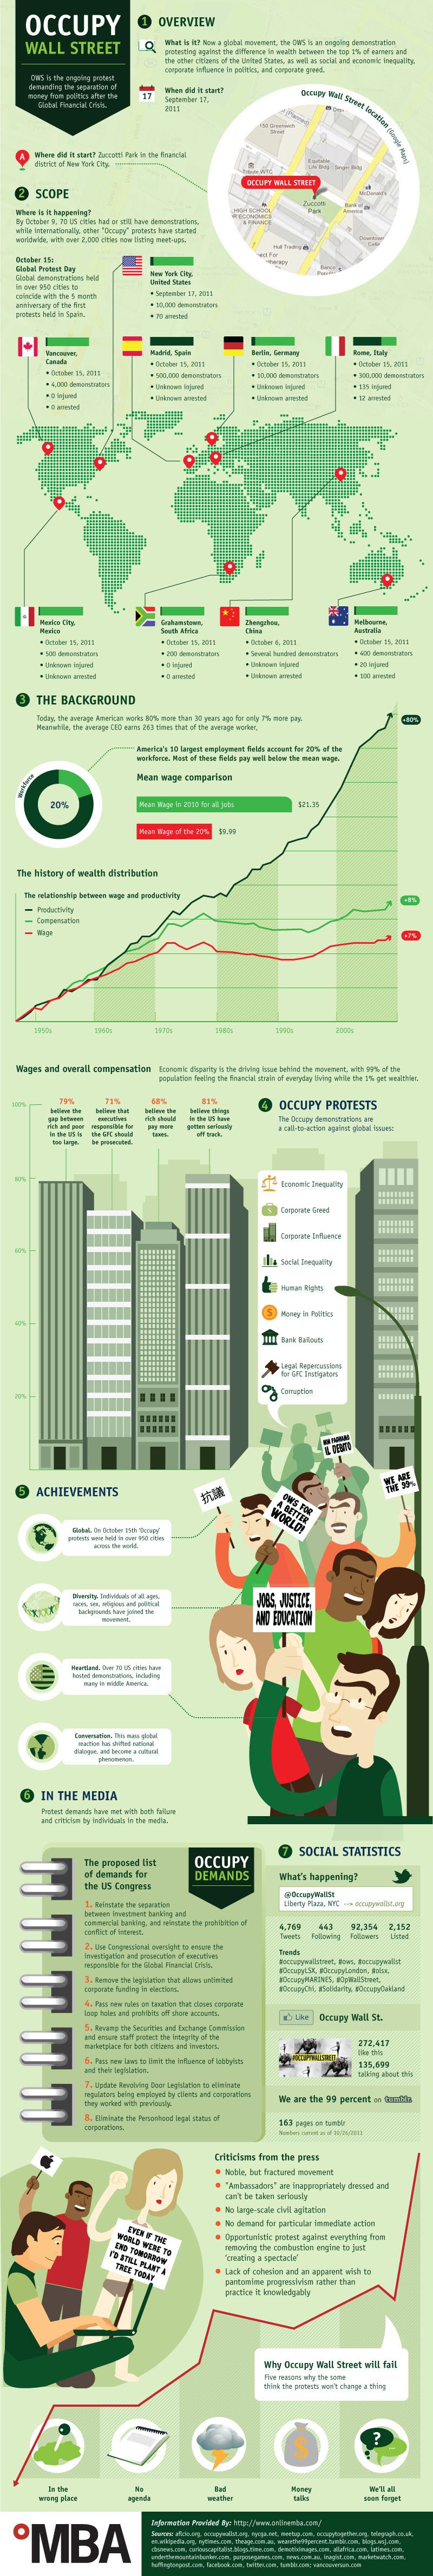 Occuopy Wall Street infographic